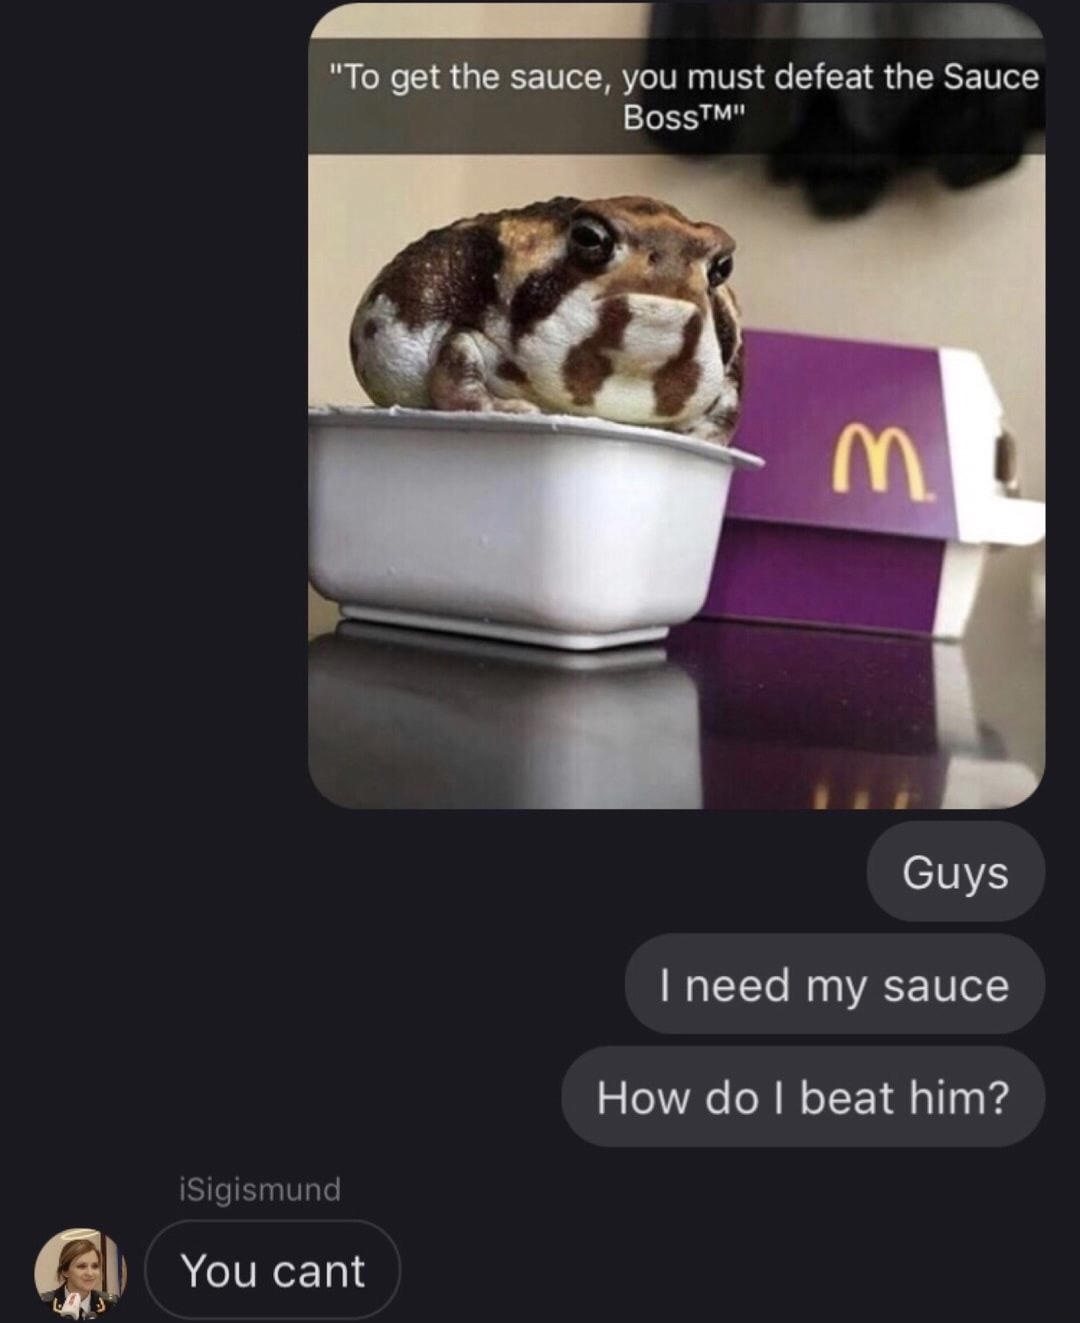 sauce boss meme - "To get the sauce, you must defeat the Sauce BossTM" Guys I need my sauce 'How do I beat him? iSigismund You can You cant